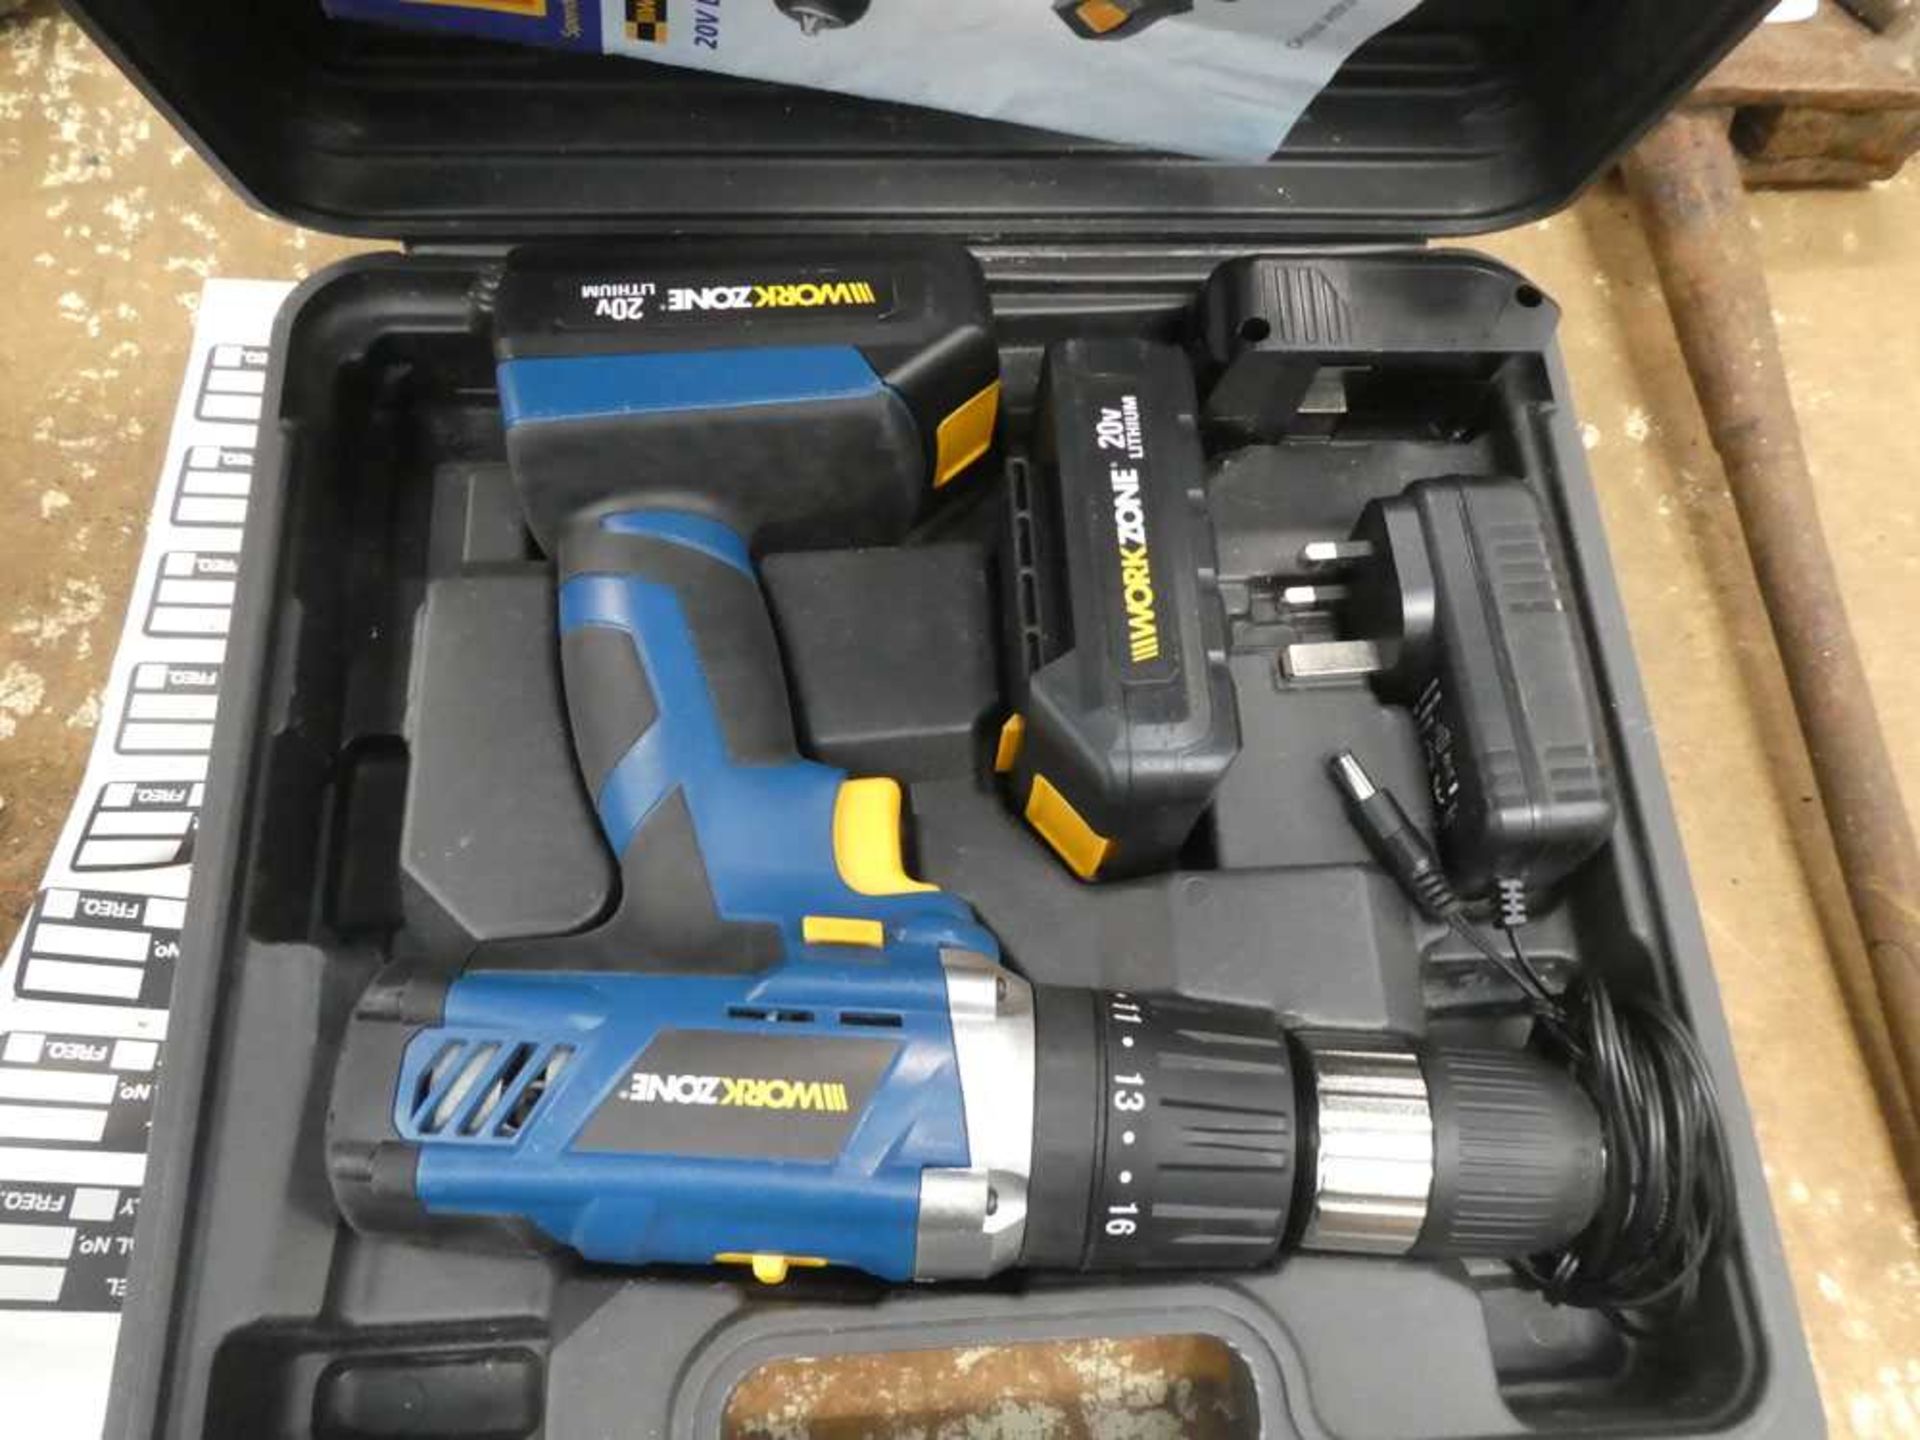 Aldi Workzone battery drill with 2 batteries and charger